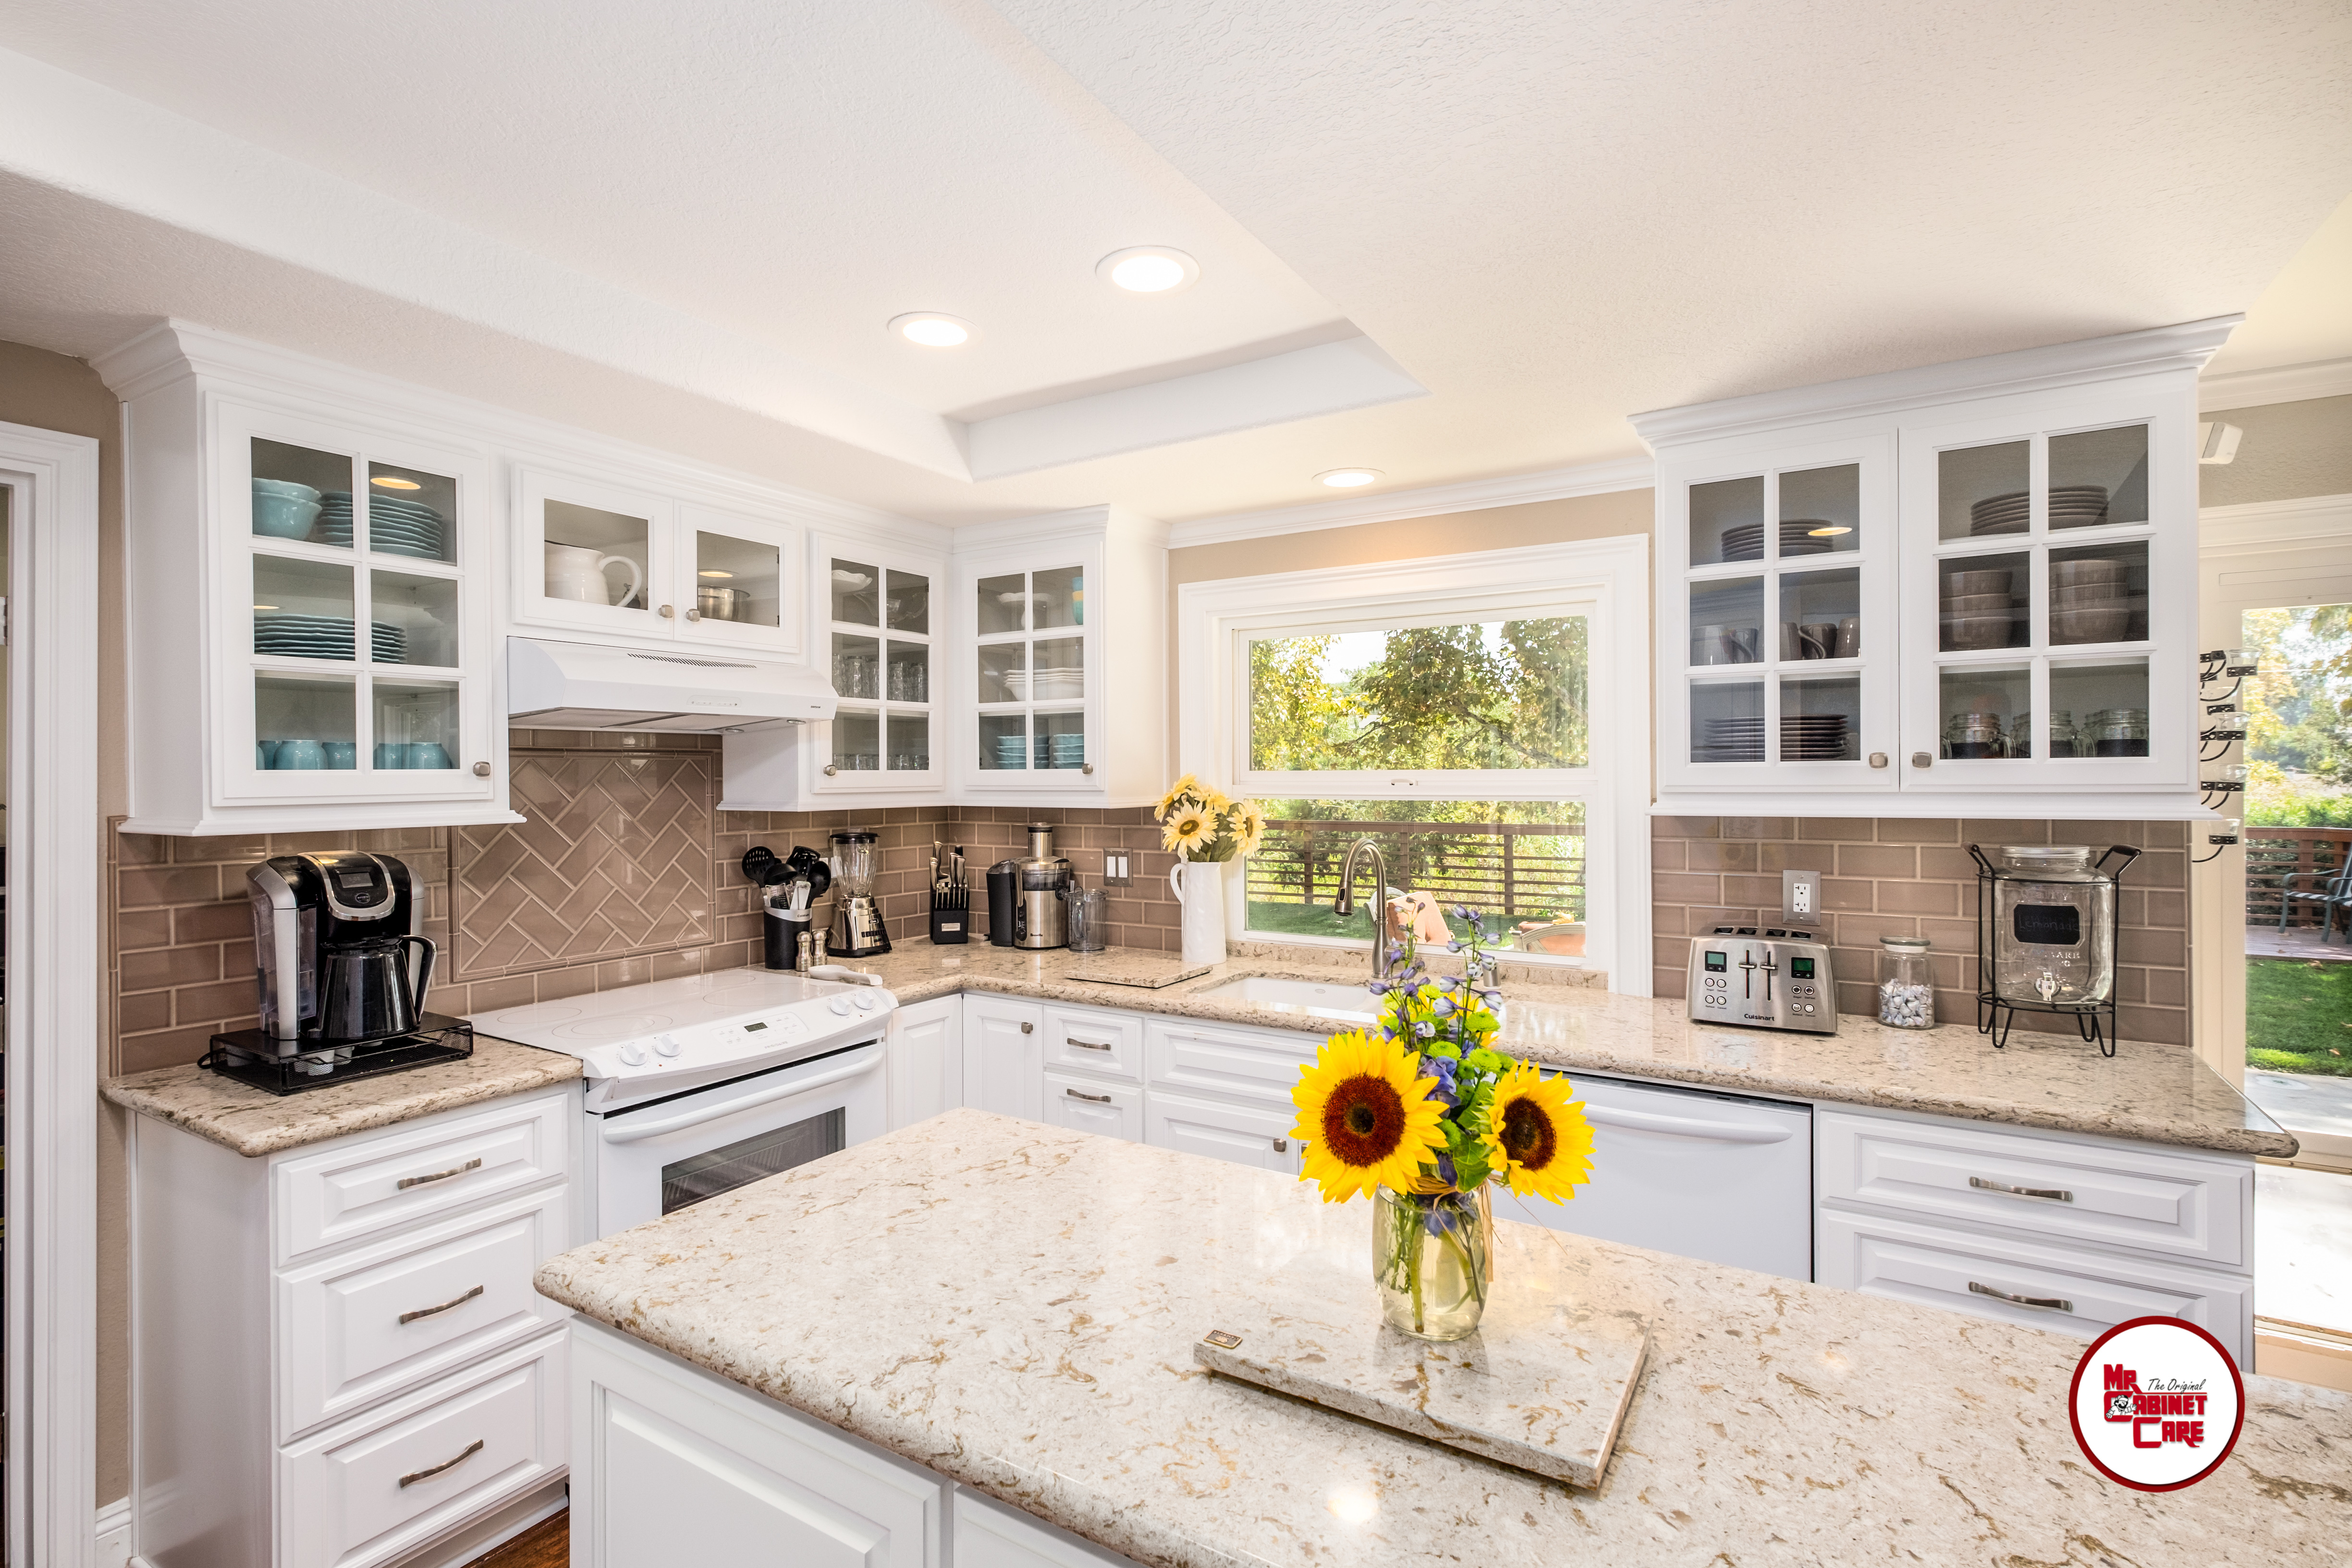 Kitchen Remodeling Services in Aliso Viejo